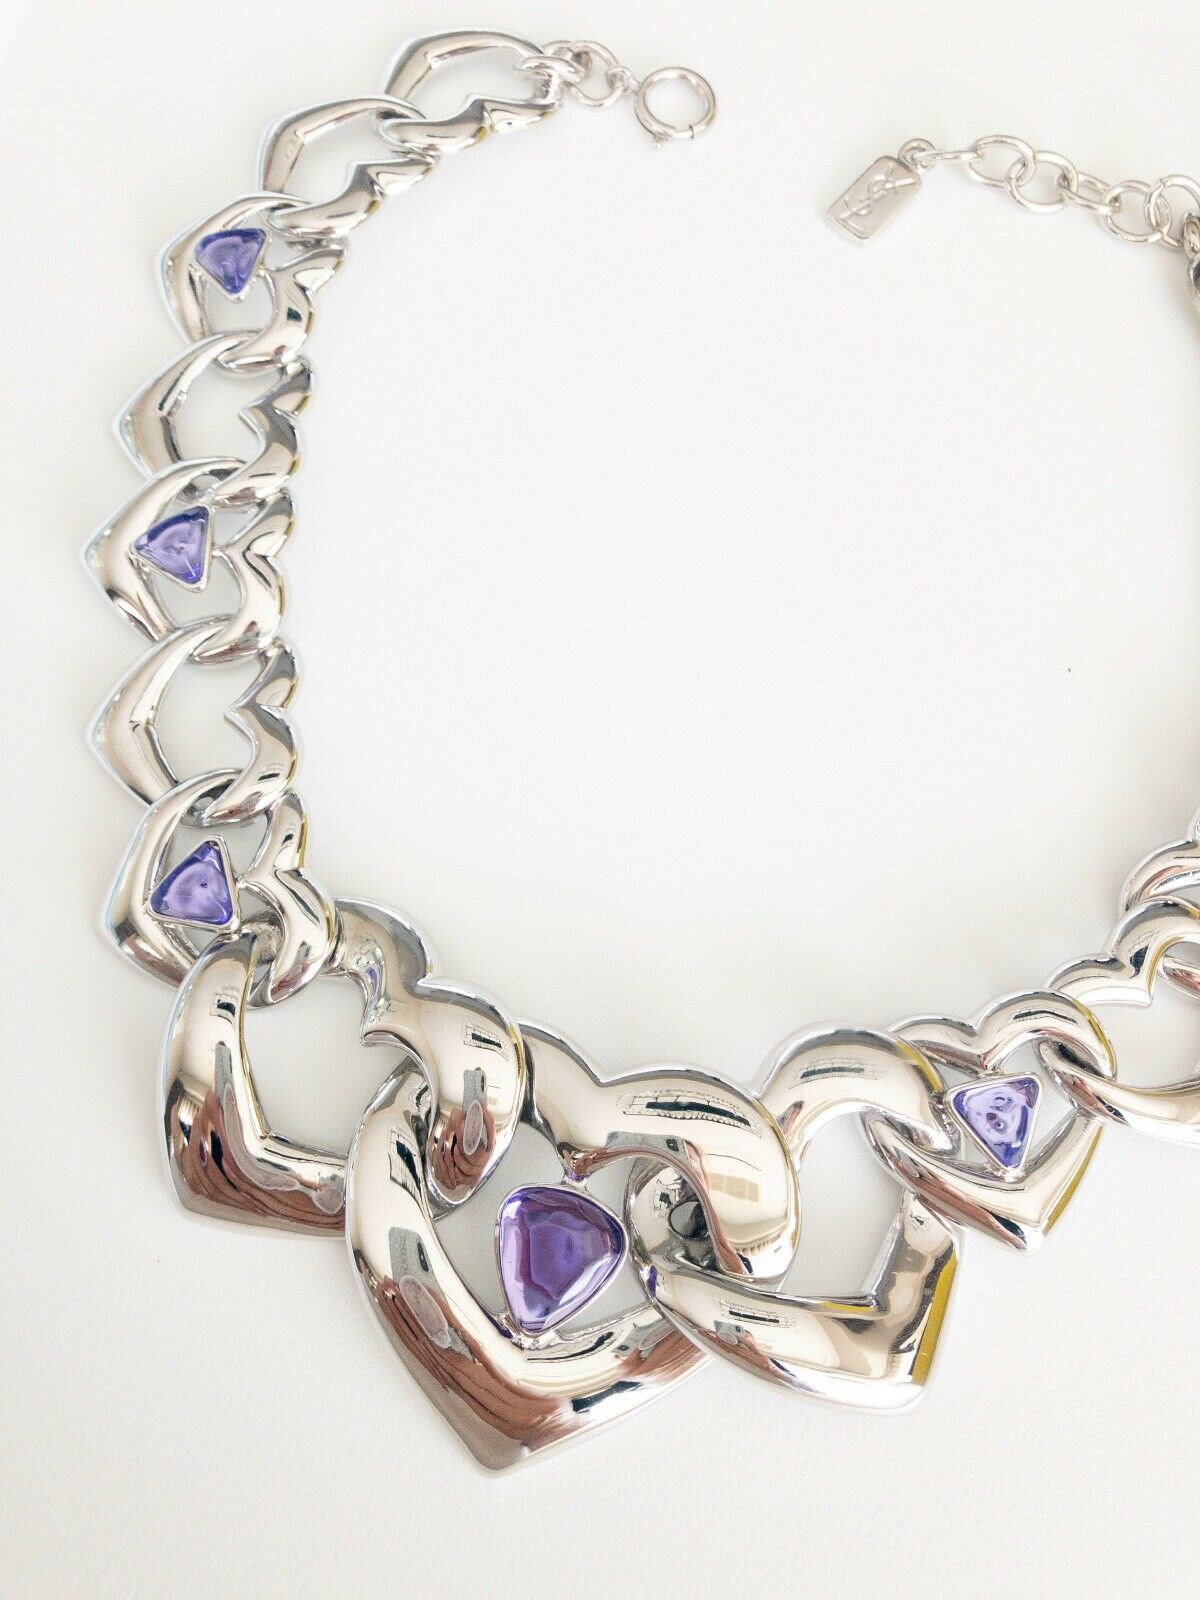 YSL Yves Saint Laurent Silver Tone Heart With Resin Necklace Gorgeous